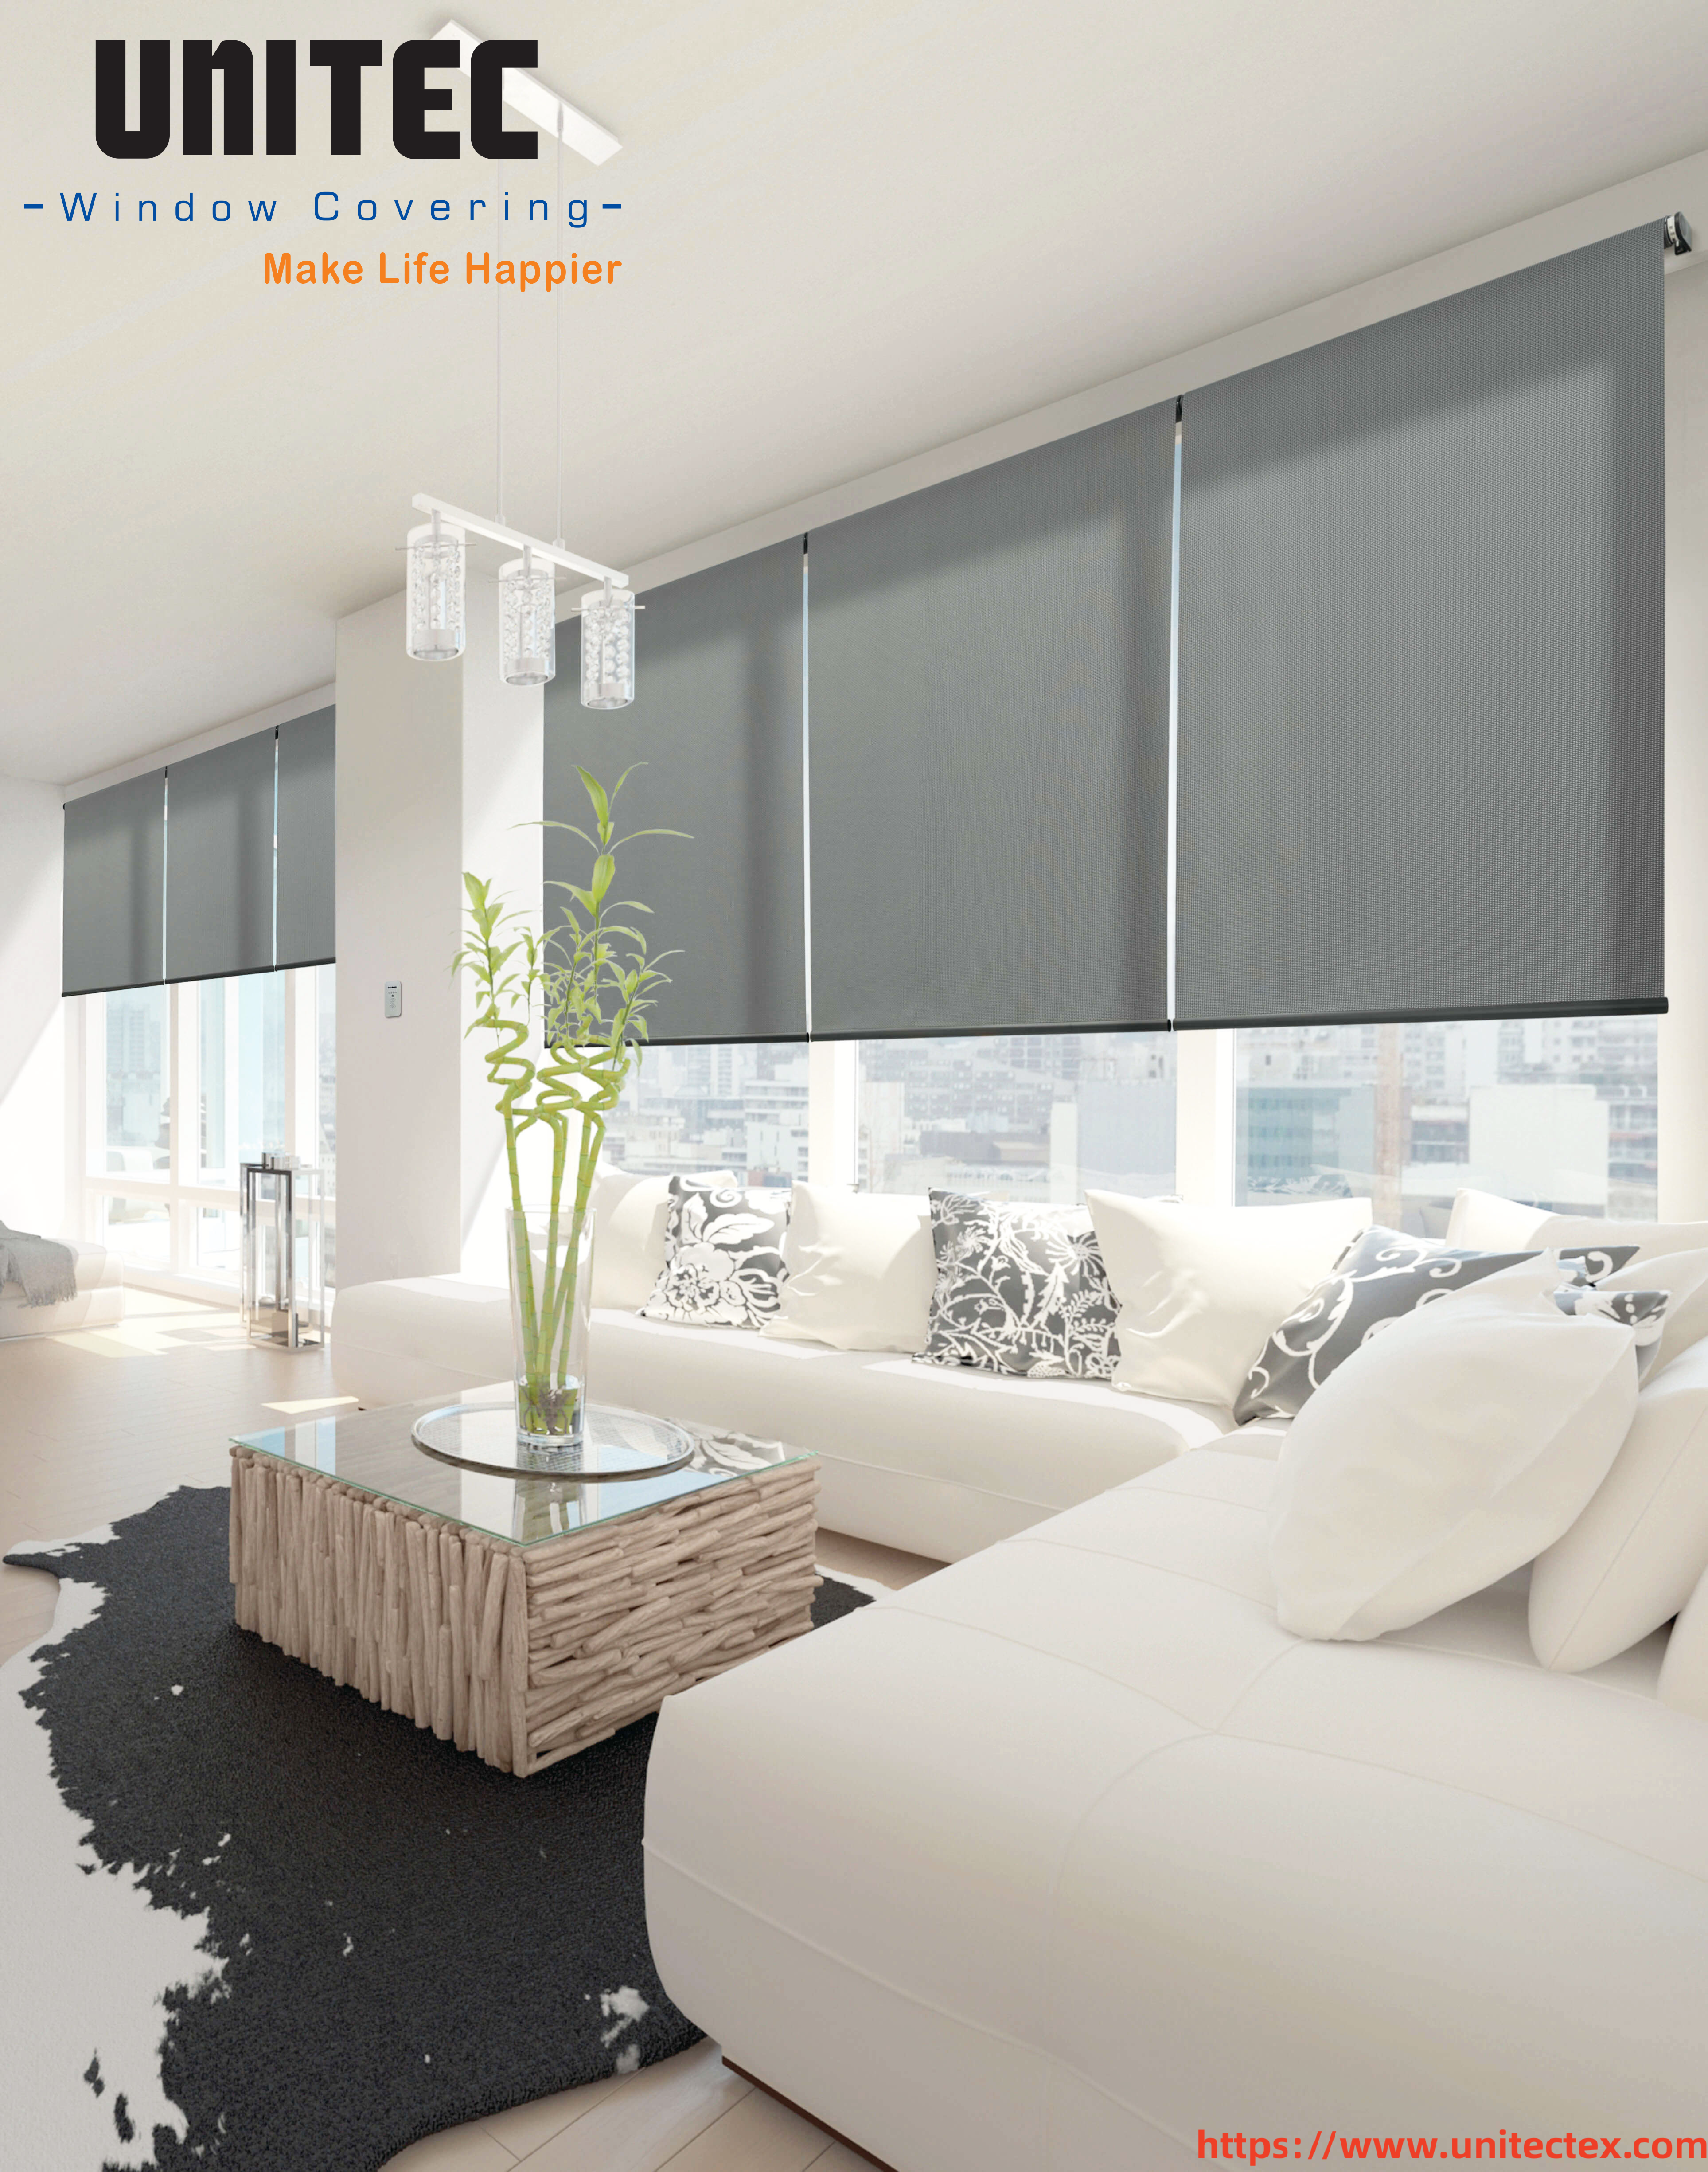 The advantages and hazards of cutting roller shades? What are the materials of blackout curtains?